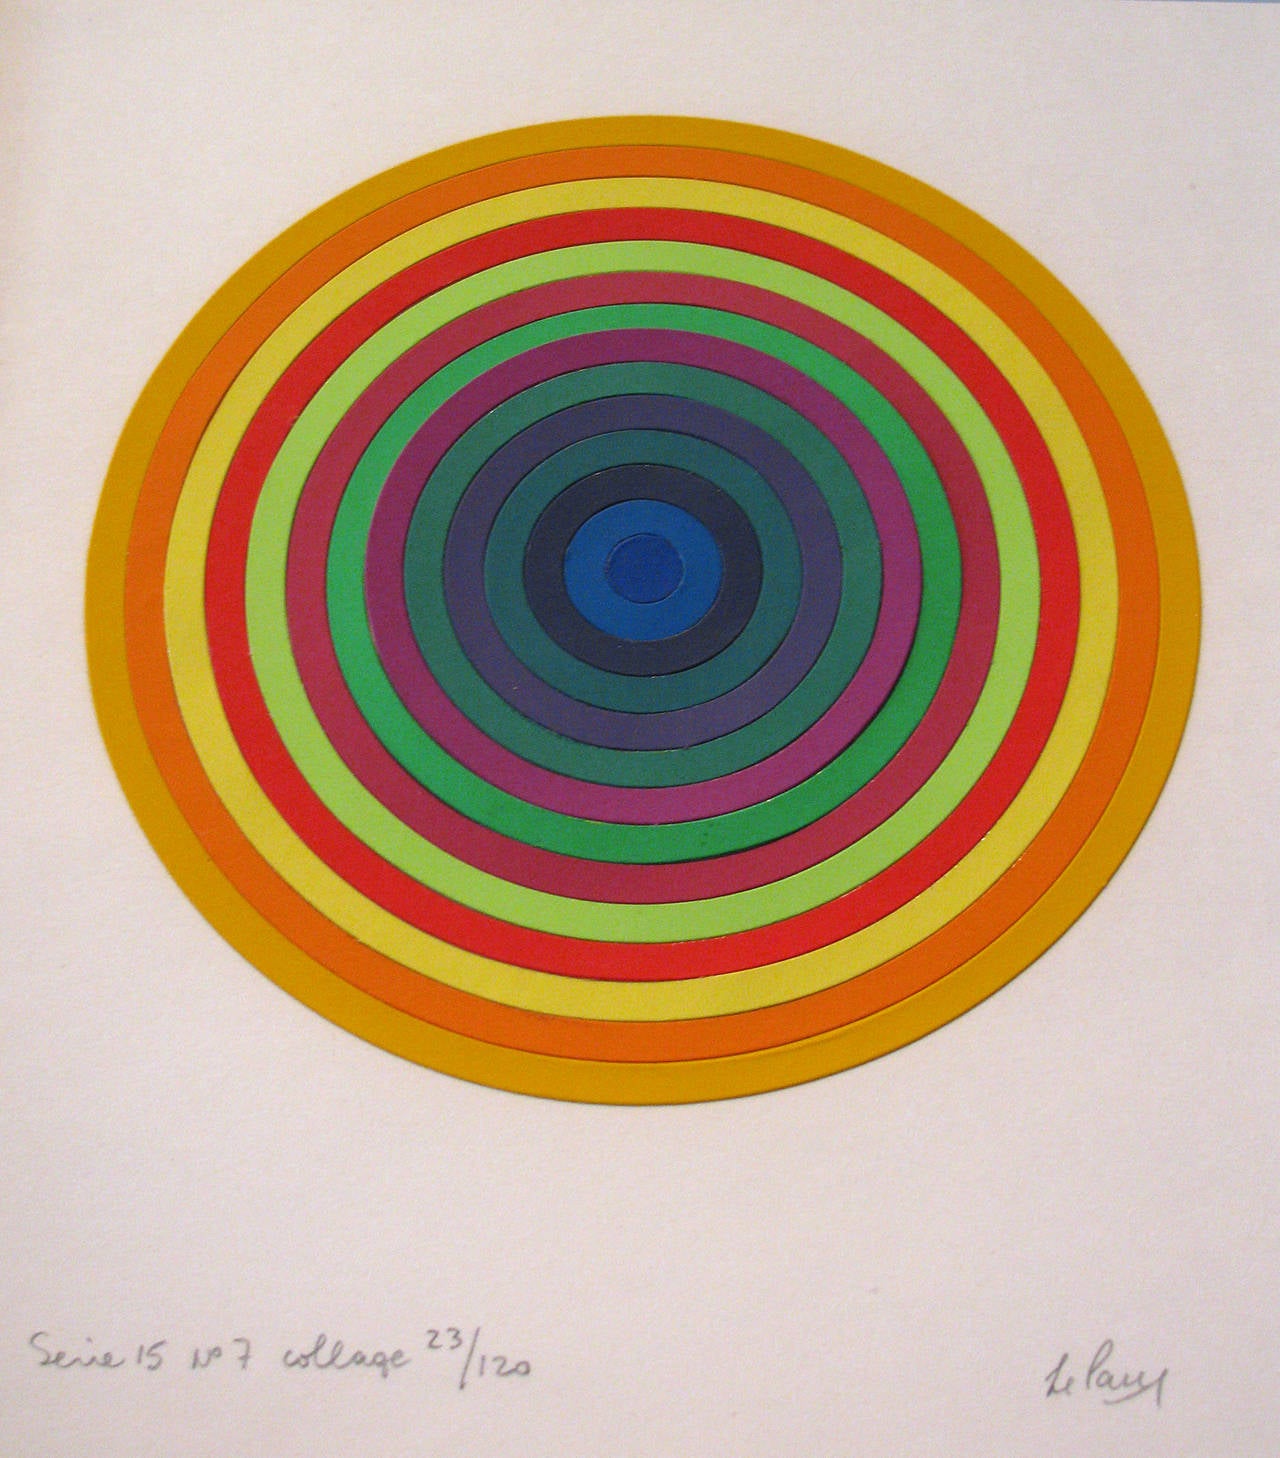 Julio Le Parc (Argentine, born 1928) Series 15 number 7 collage circles, circa 1971. Signature and title in pencil. Select permanent collections of Le Parc's work; Collection du Conseil général du Val-de-Marne, Créteil, France.
Museo Extremeno